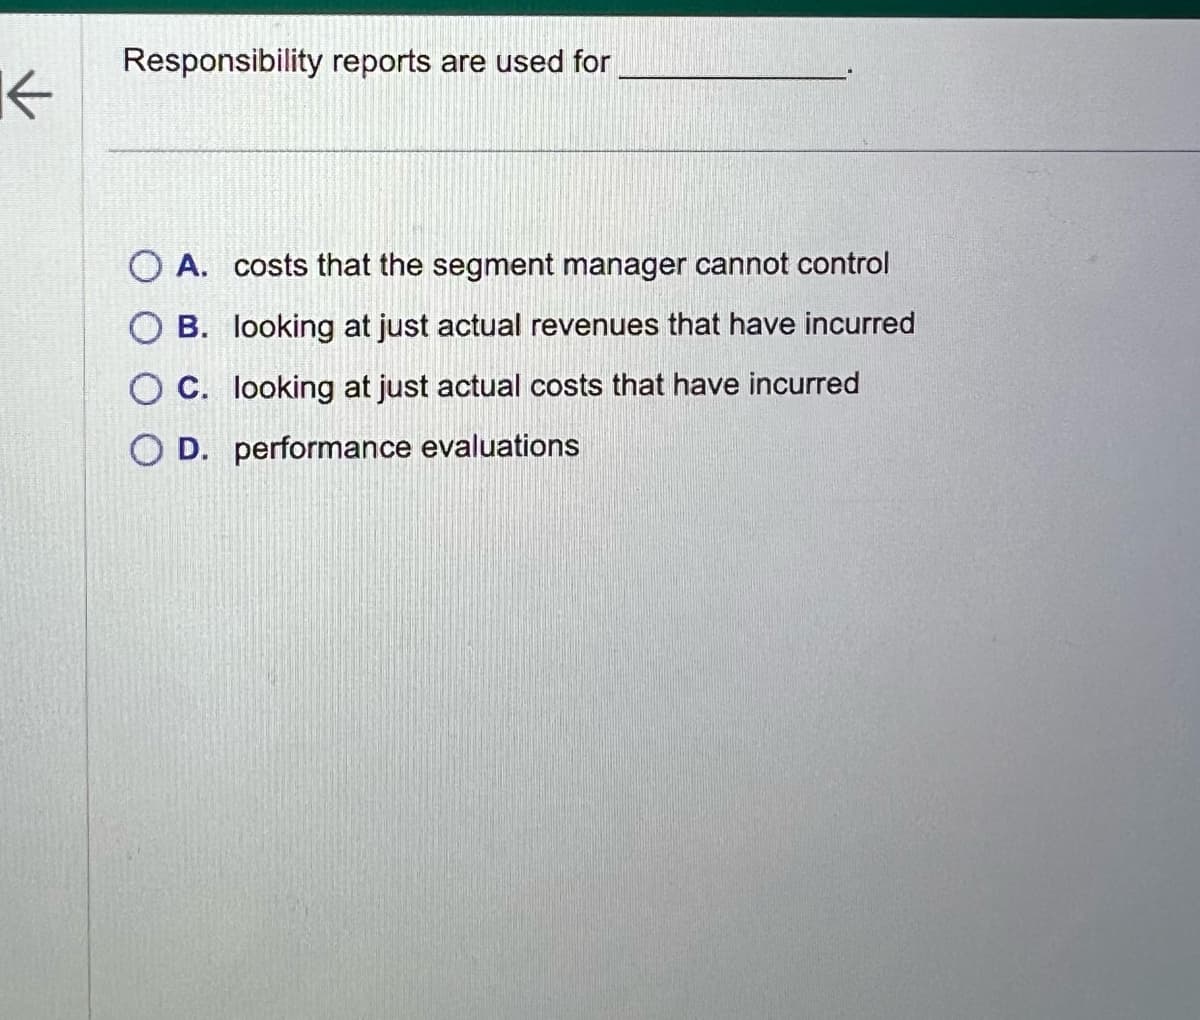 ←
Responsibility reports are used for
O A. costs that the segment manager cannot control
OB. looking at just actual revenues that have incurred
OC. looking at just actual costs that have incurred
OD. performance evaluations